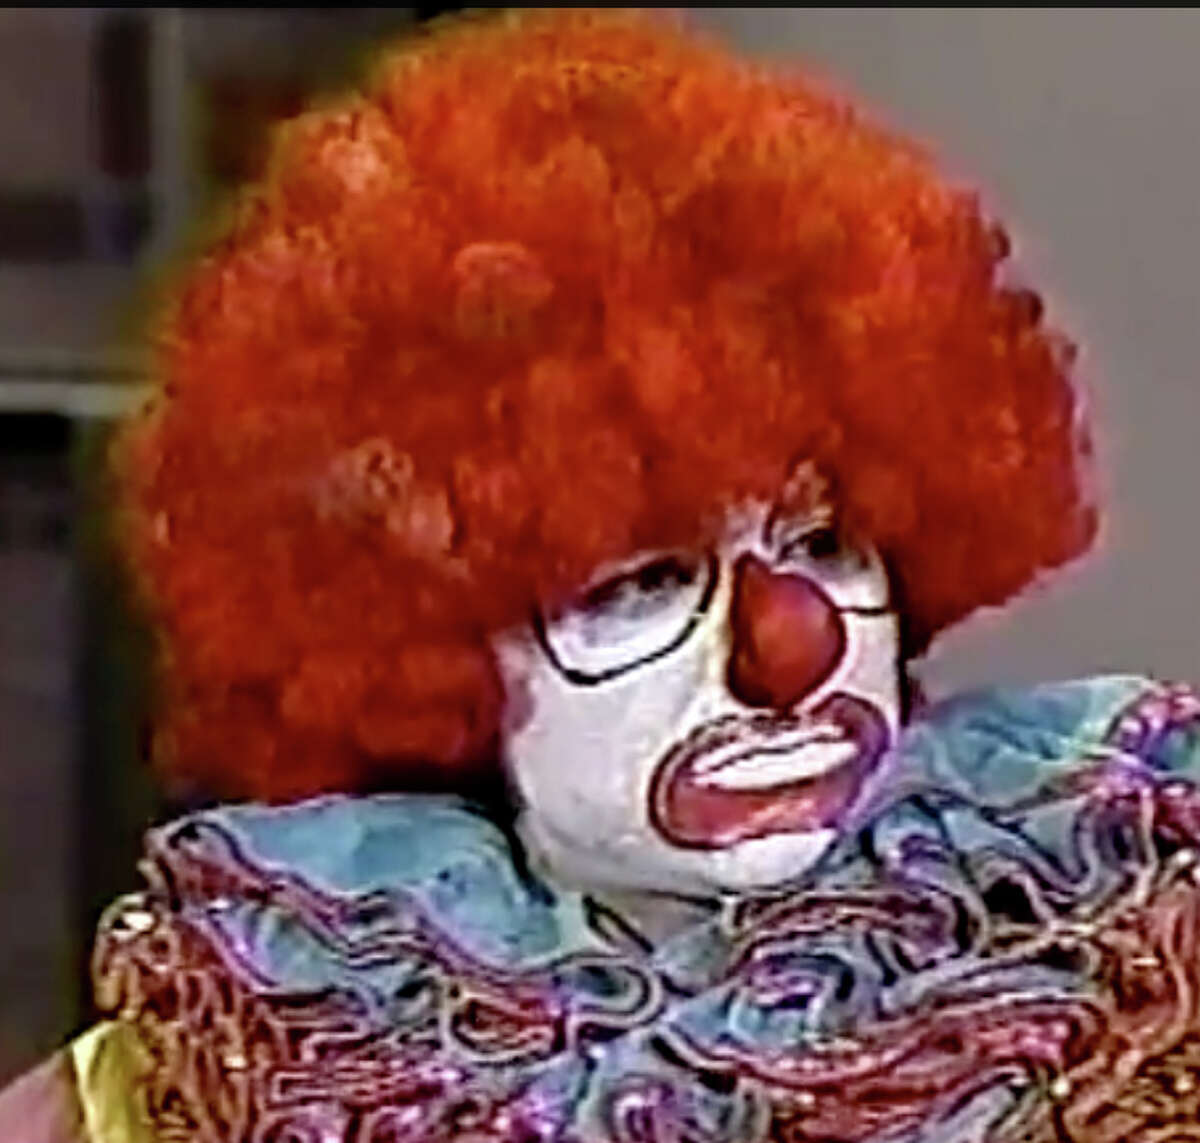 Jeff Martin played Flunky the Clown on "Late Night With David Letterman."